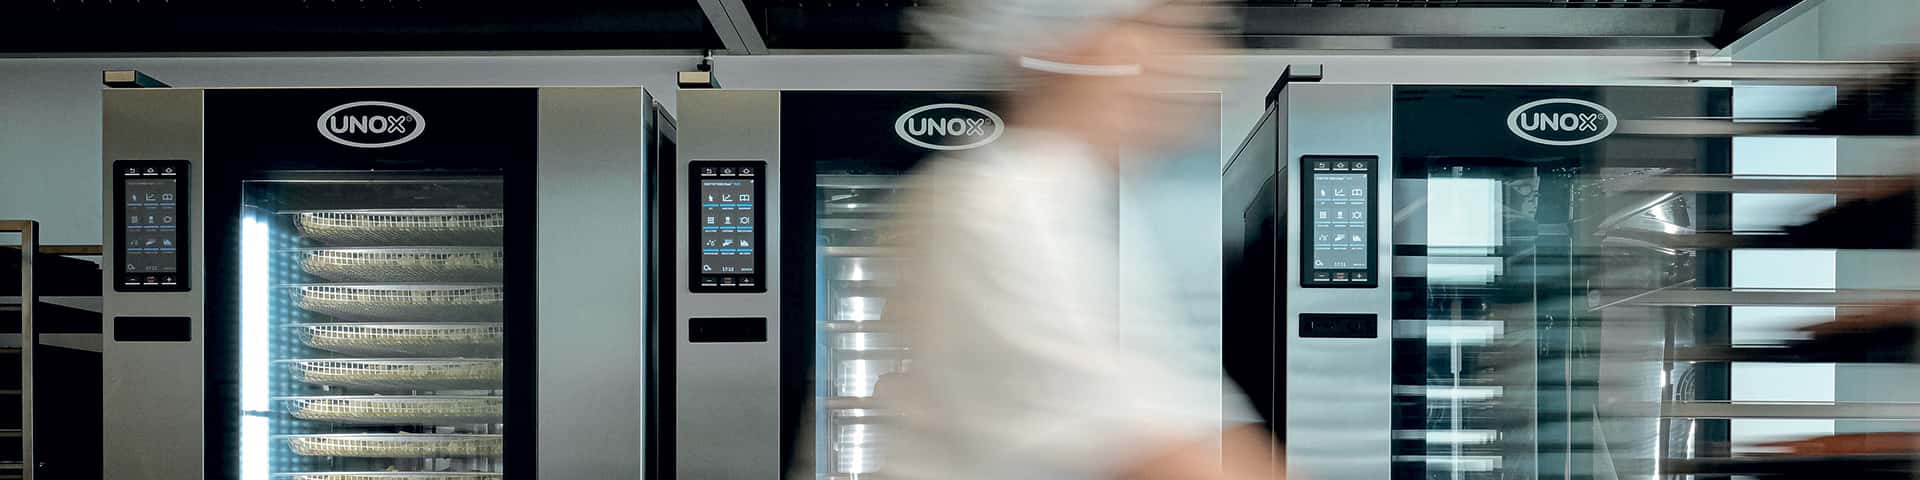 <h1><strong>Commercial trolley combi oven</strong></h1>